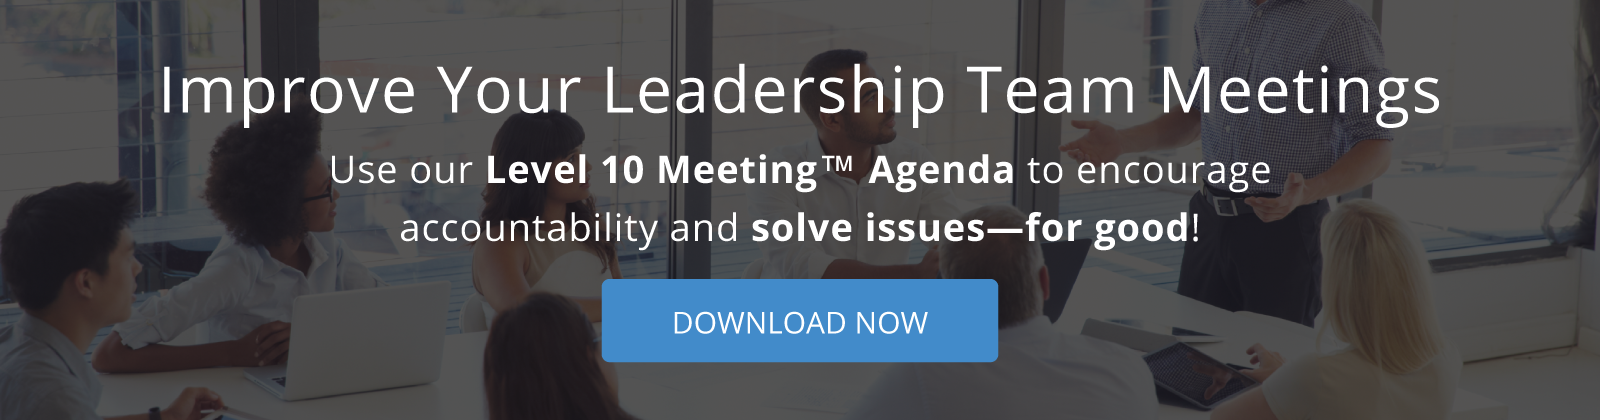 Improve Your Leadership Team Meeting. Download our level 10 meeting agenda